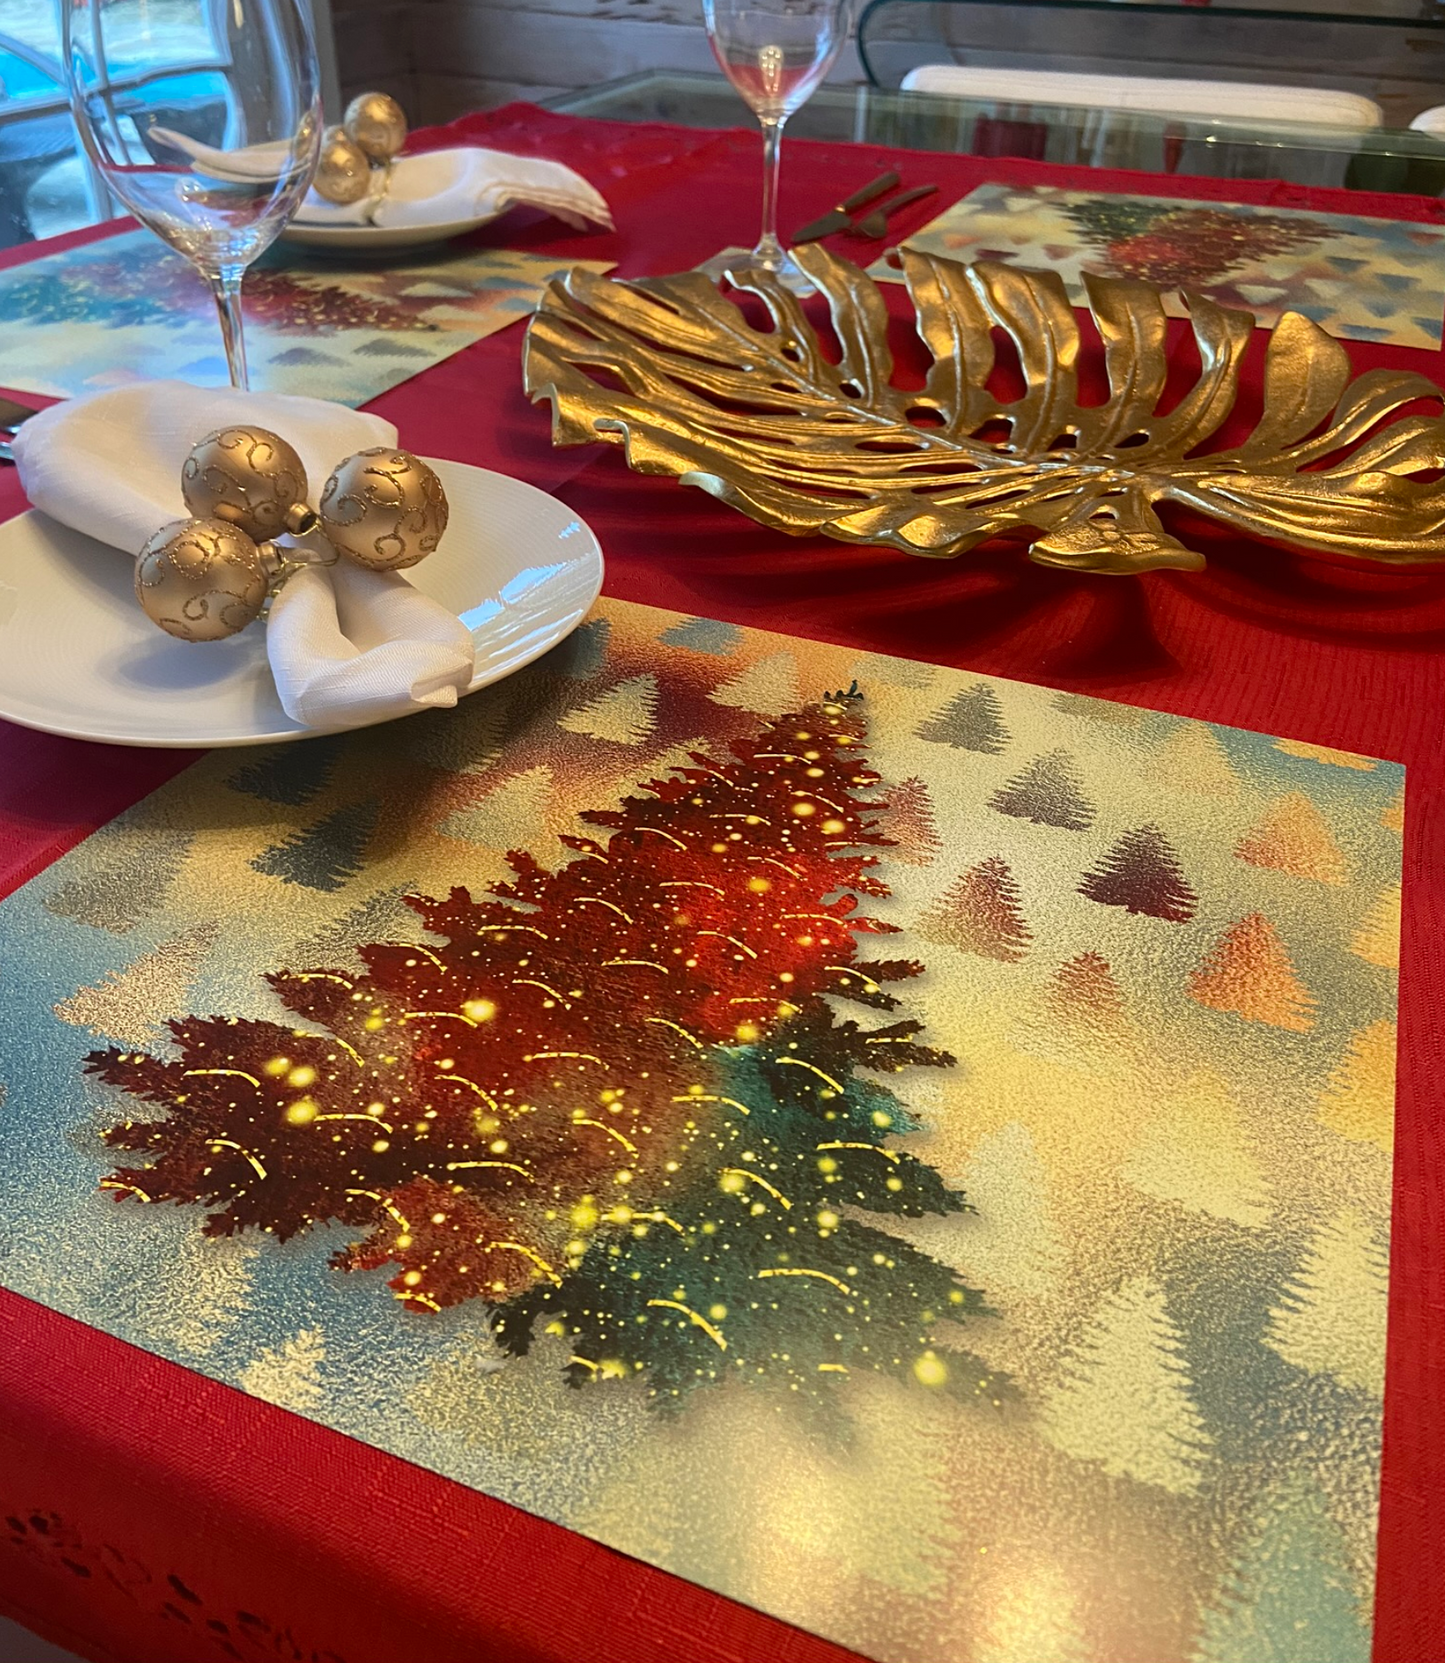 CHRISTMAS TREE FOIL  LOOK PAPER PLACEMAT